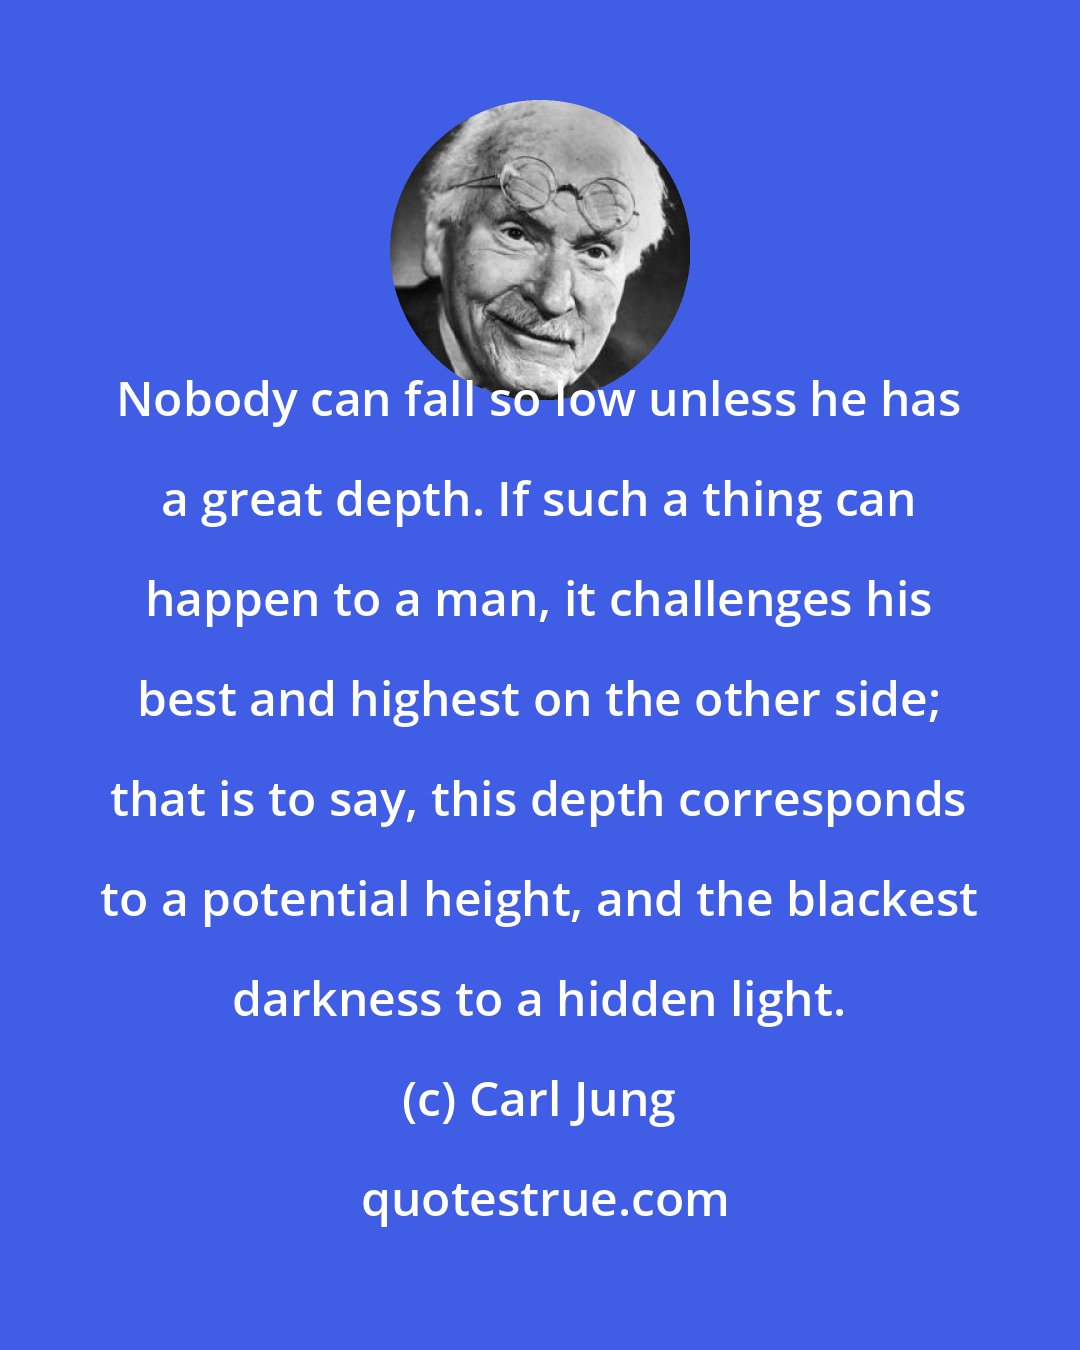 Carl Jung: Nobody can fall so low unless he has a great depth. If such a thing can happen to a man, it challenges his best and highest on the other side; that is to say, this depth corresponds to a potential height, and the blackest darkness to a hidden light.